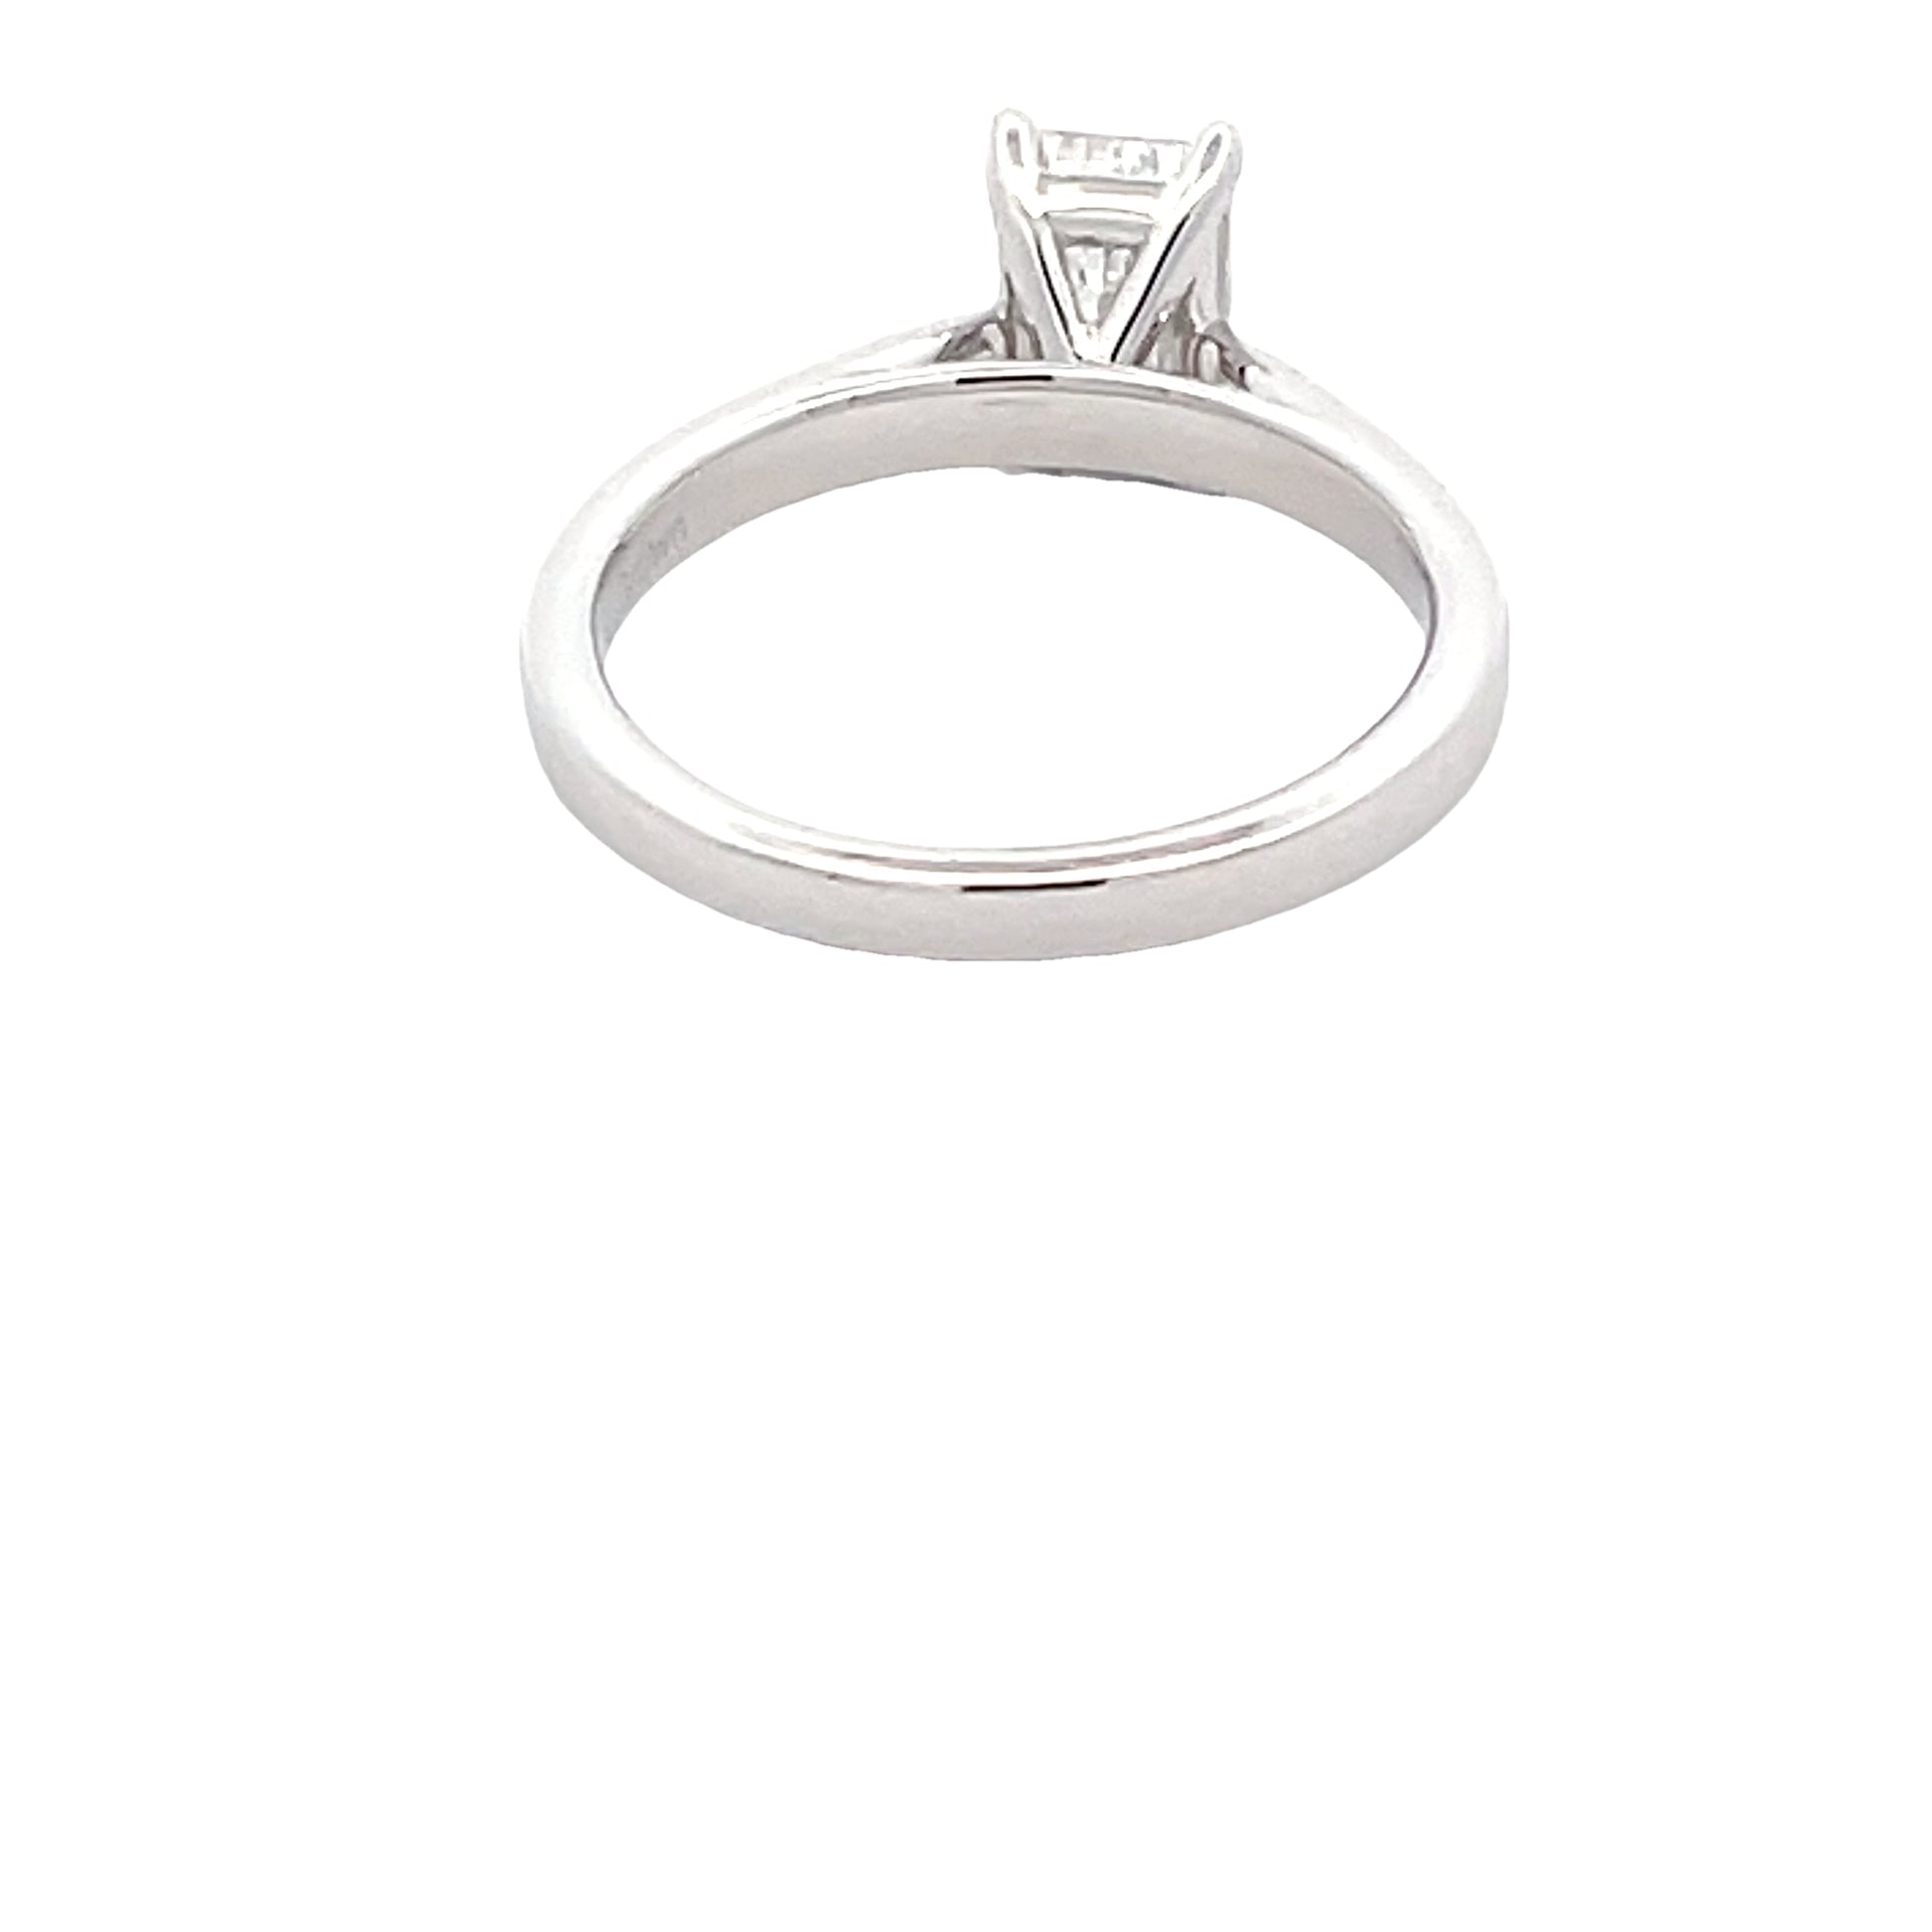 Lab grown Emerald Cut Diamond Solitaire Ring - 1.20cts  Gardiner Brothers   